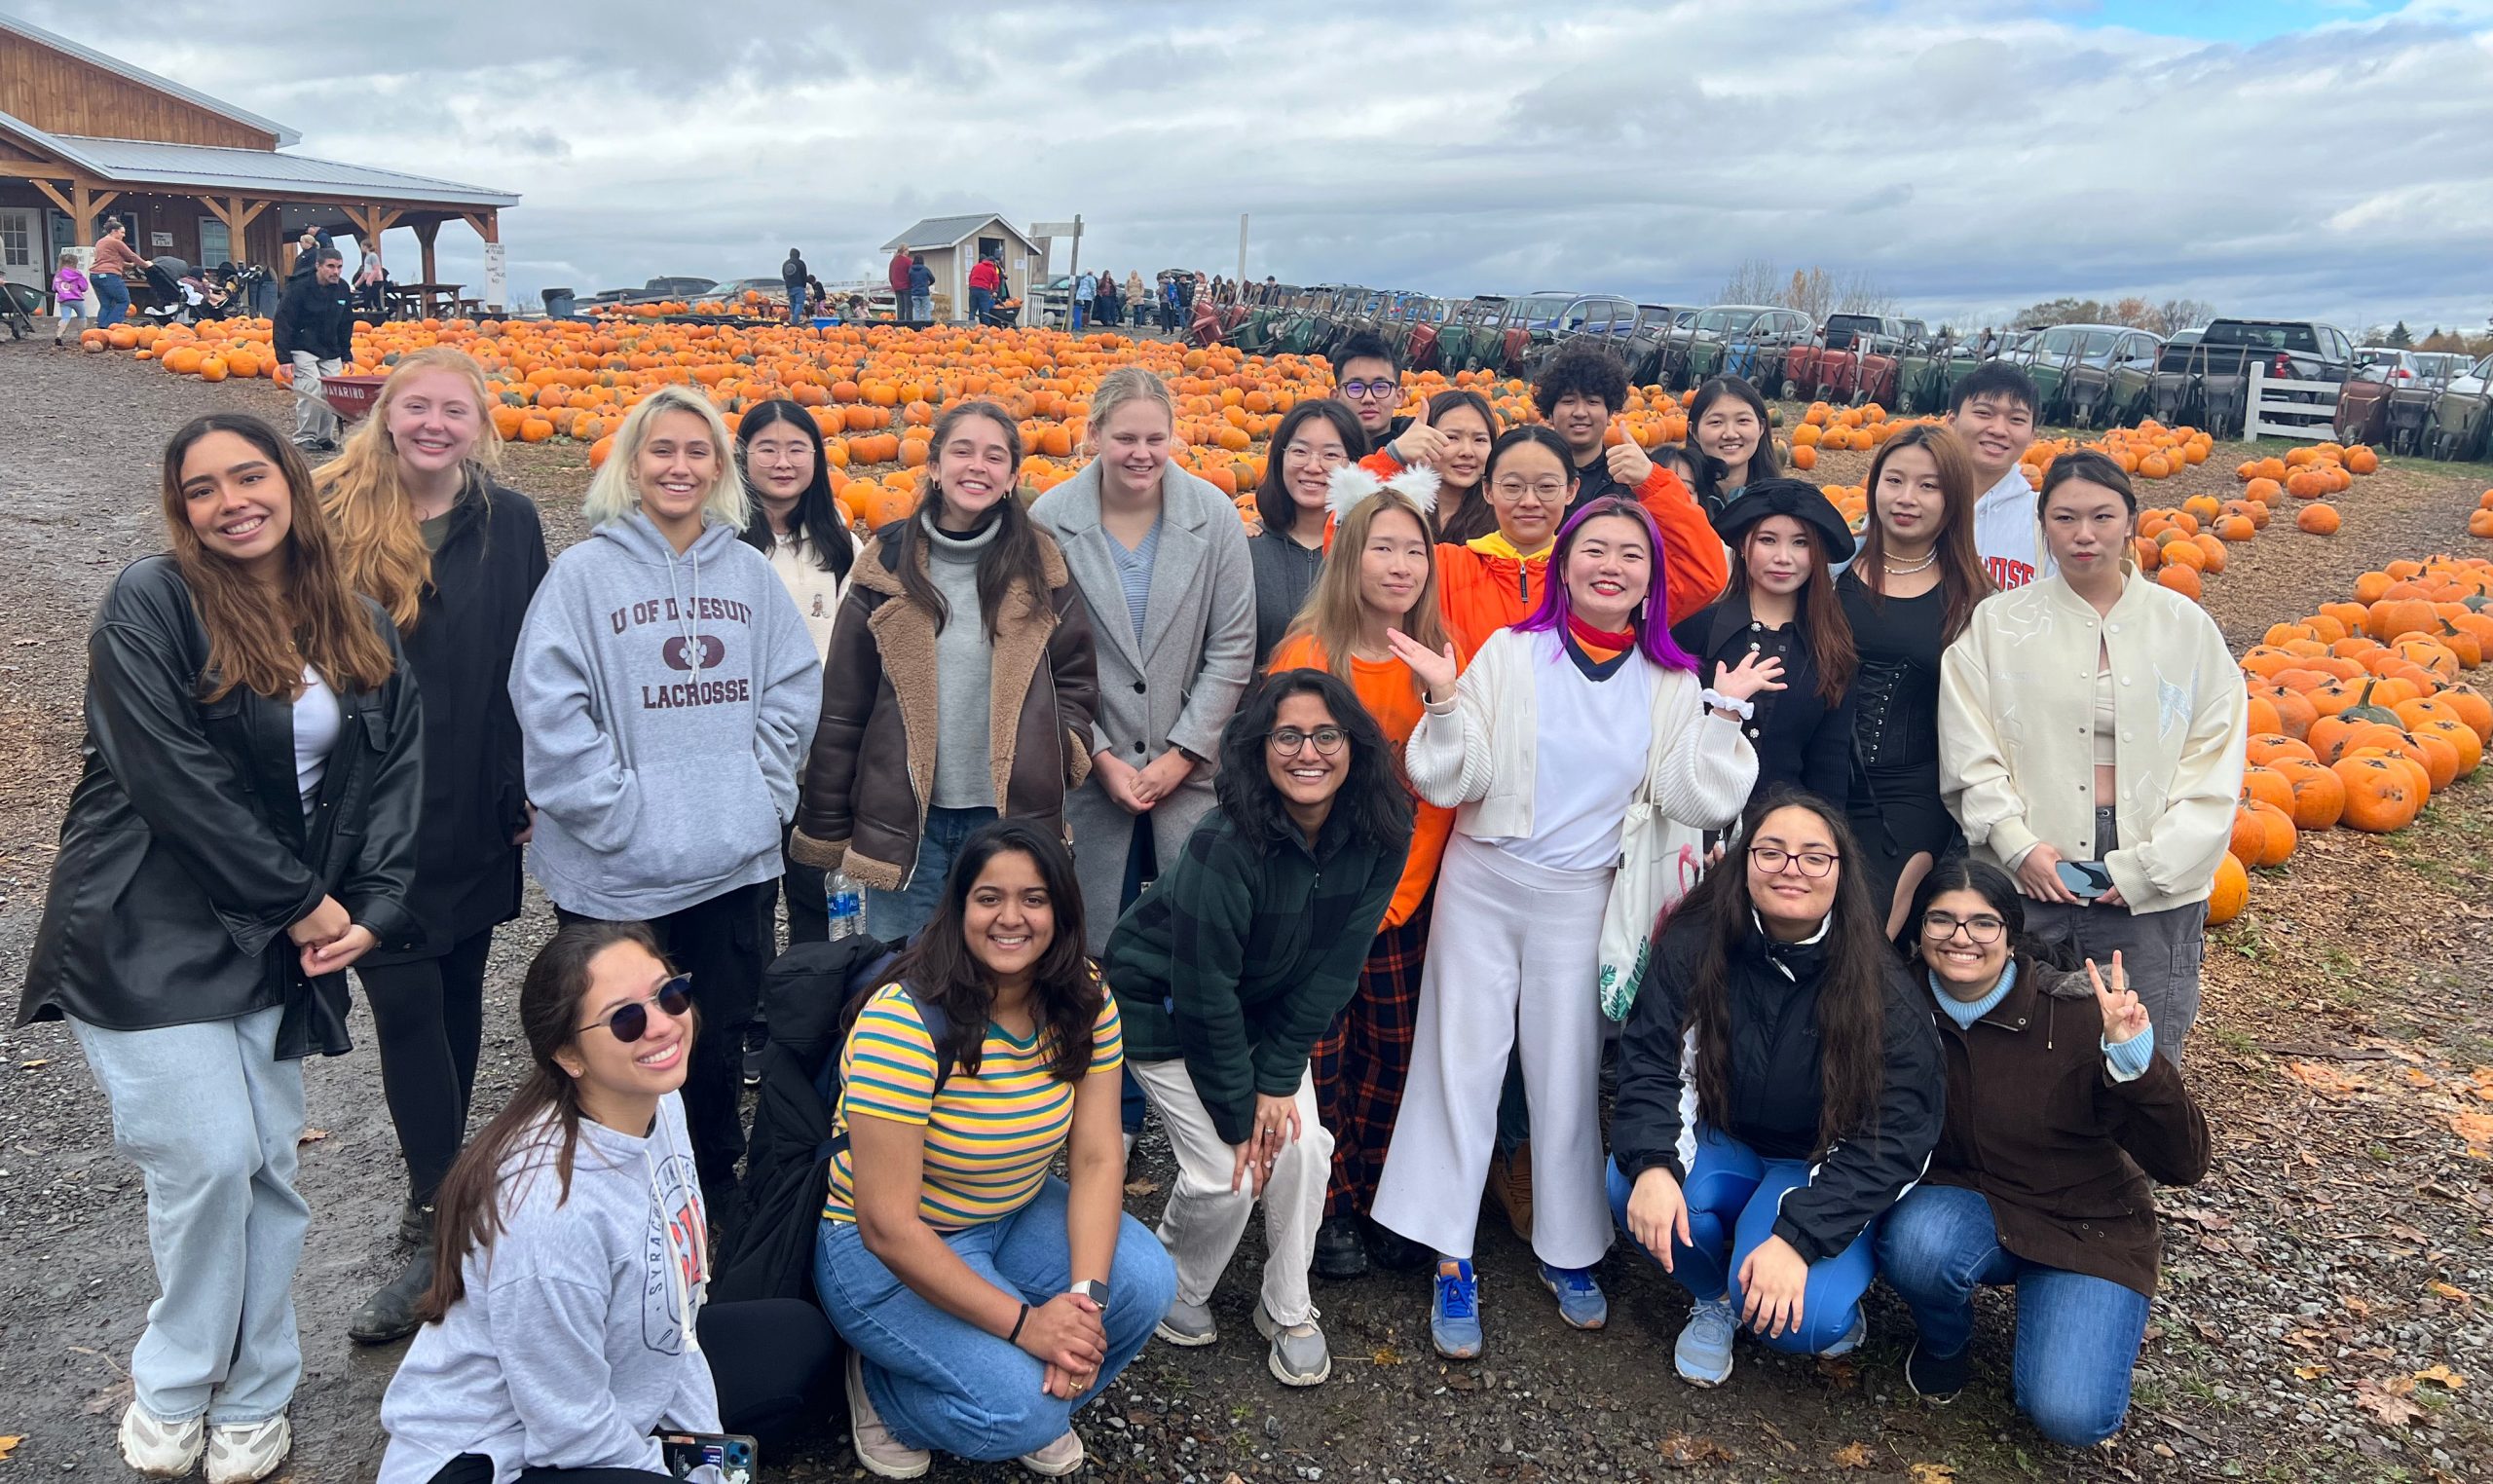 Group of students gathered together standing in front of a pumpkin patch.